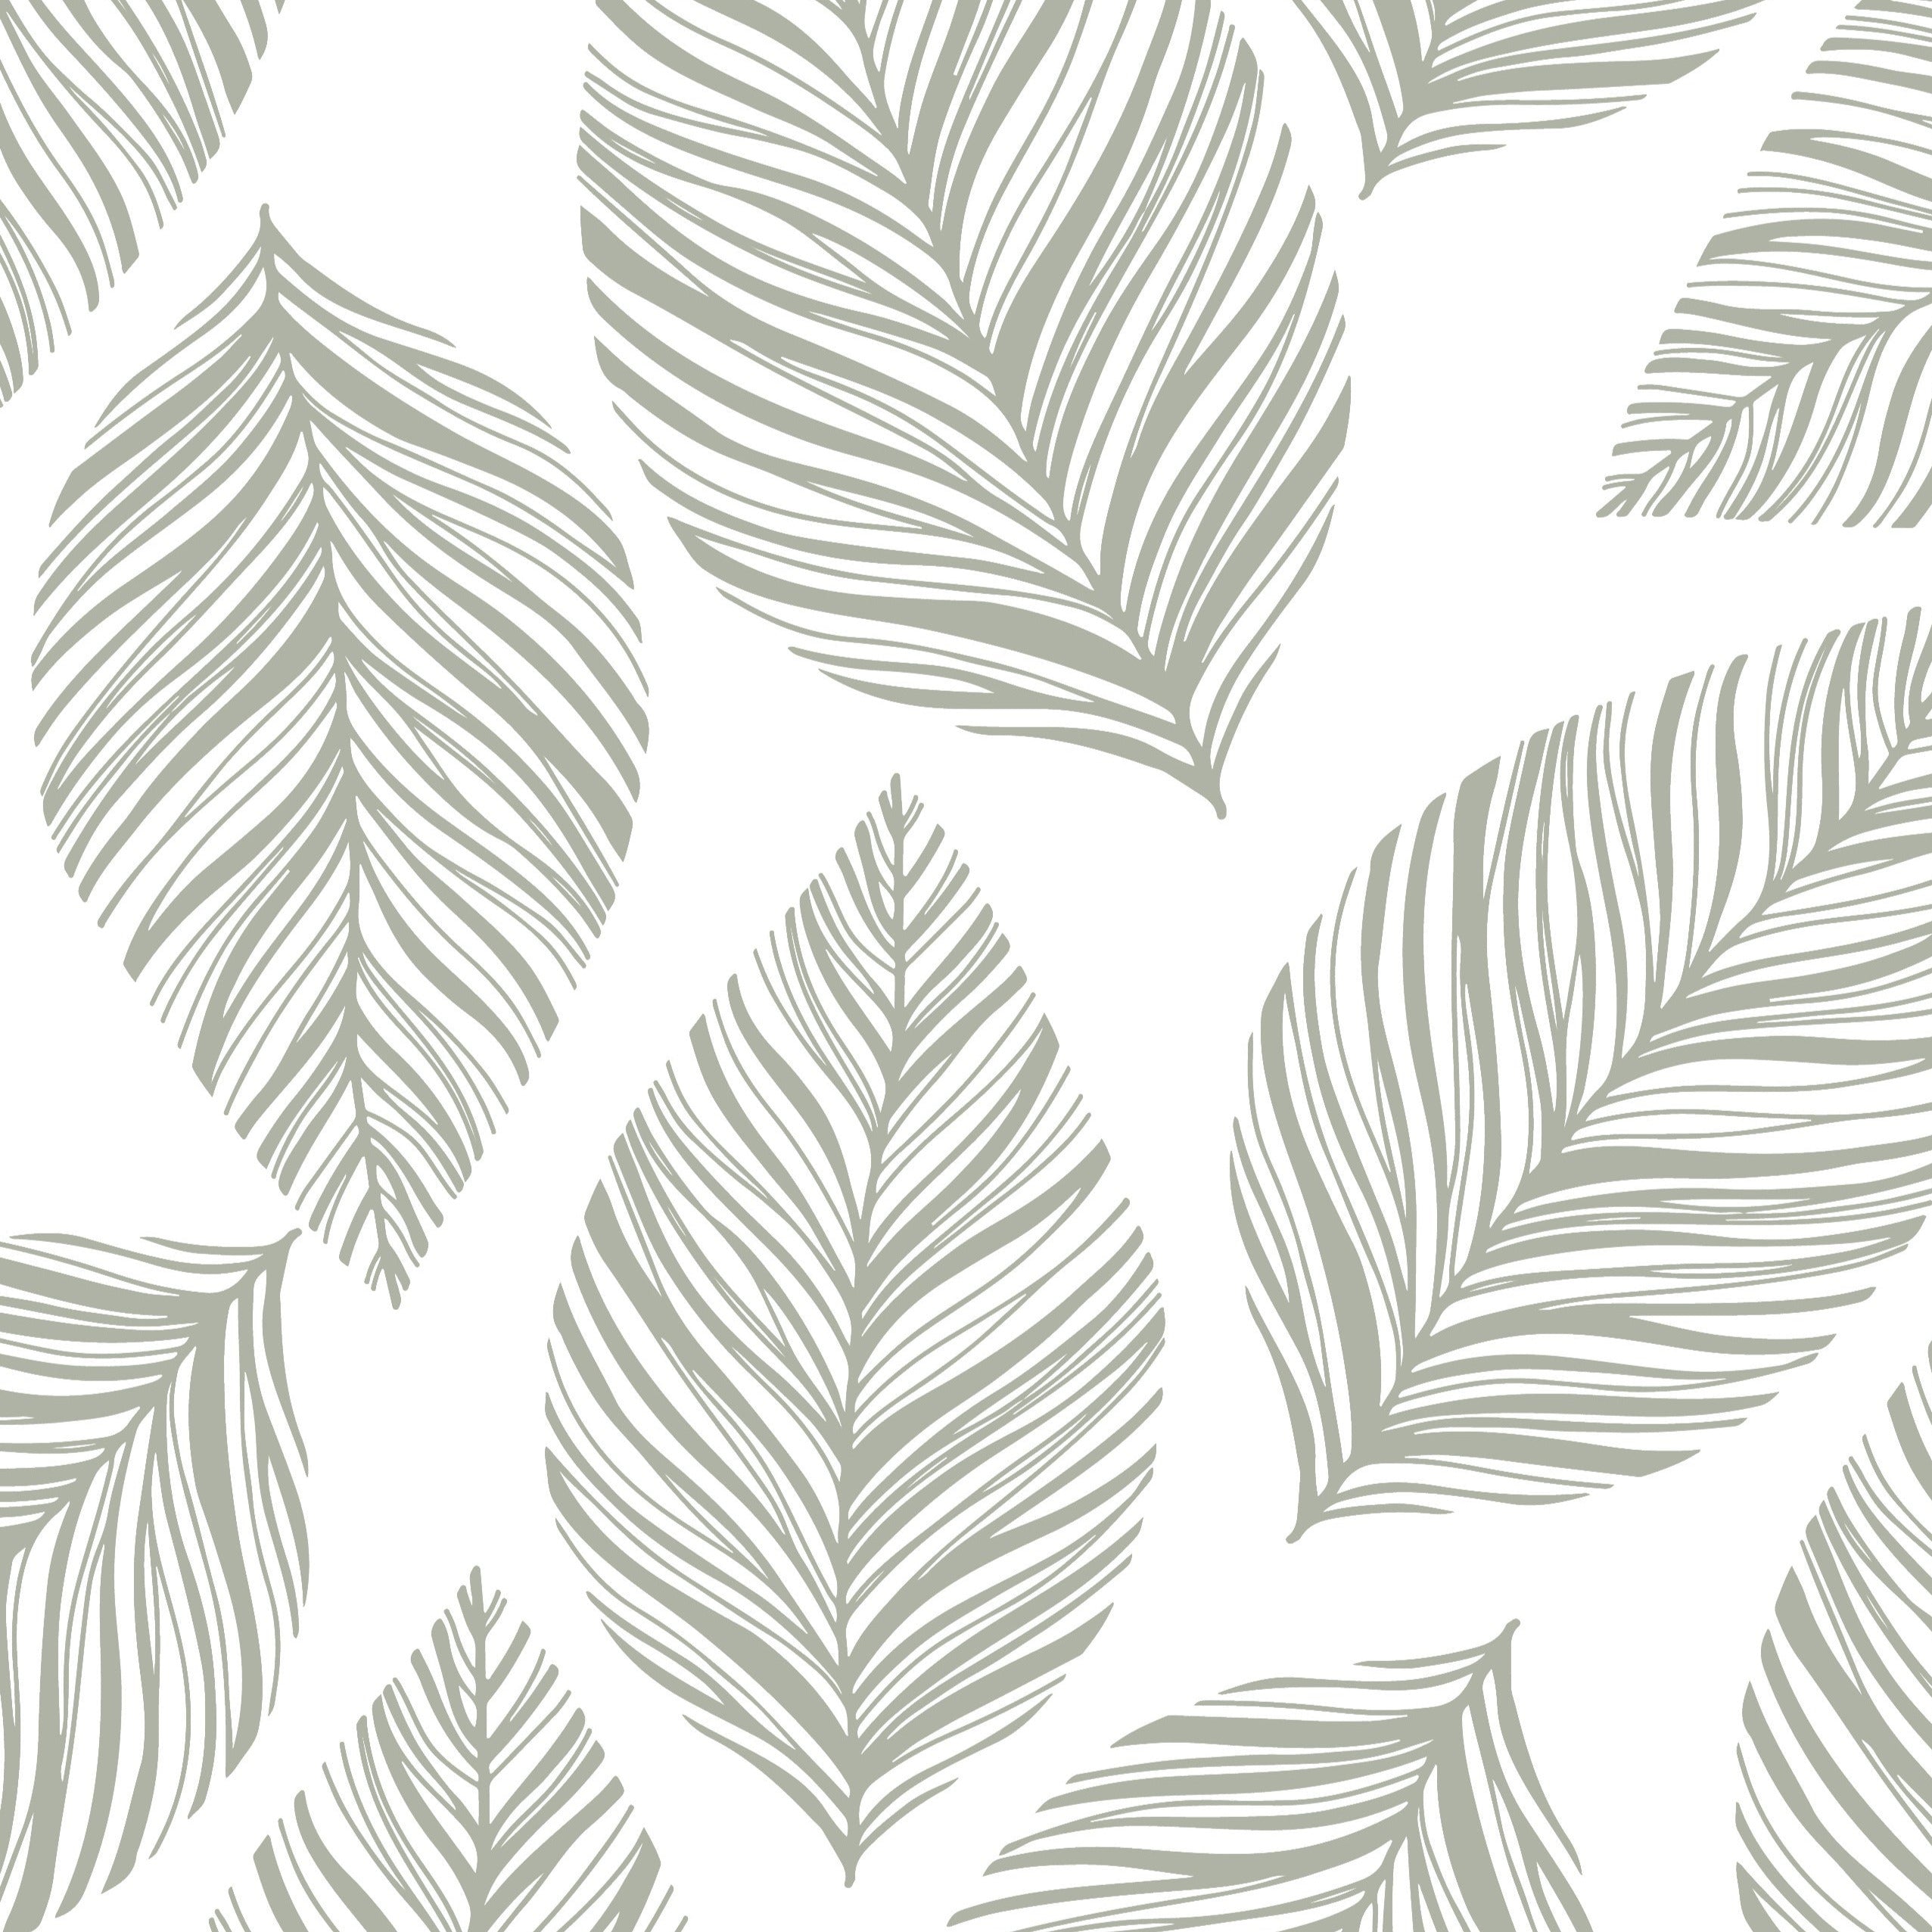 Close-up of the Leafy Wallpaper, showing detailed grey leaf patterns on a white background. The design is simple yet sophisticated, with each leaf's veins delicately highlighted, suitable for adding a natural touch to any room.